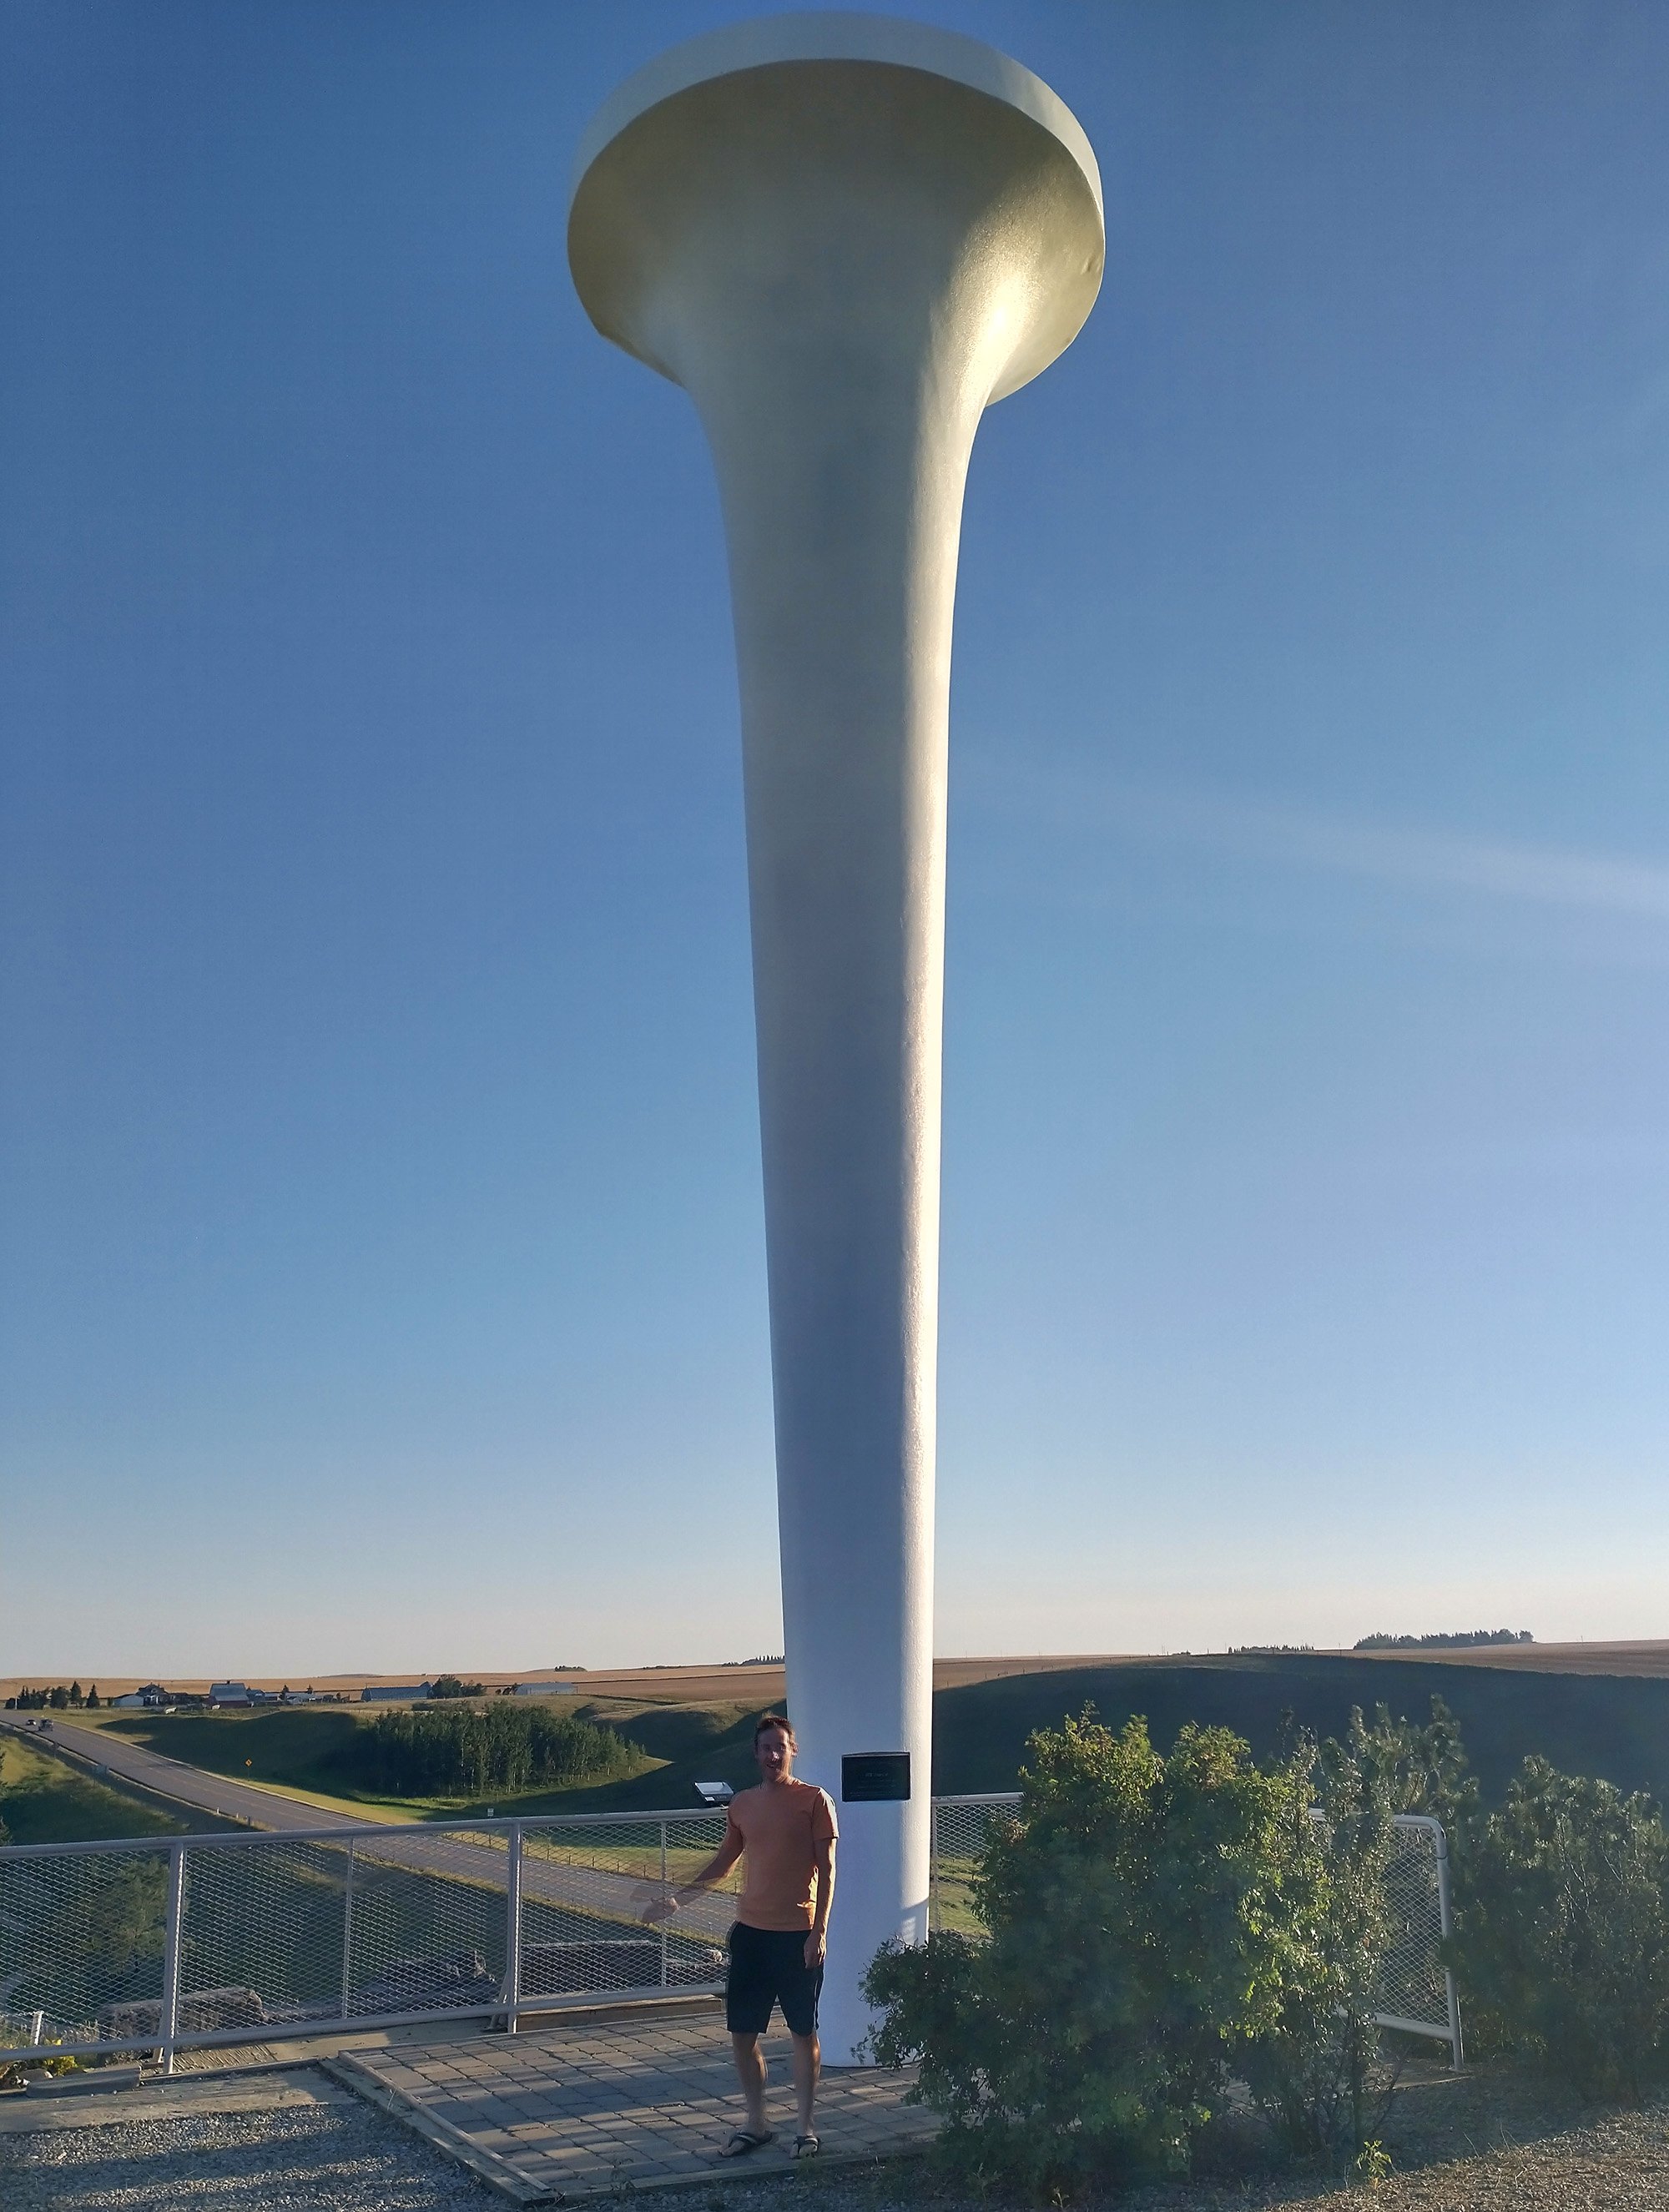 Largest Golf Tee, in Trochu, AB. I think the USA has a bigger one though because GoogleMaps kept trying to send me to Illinois. 